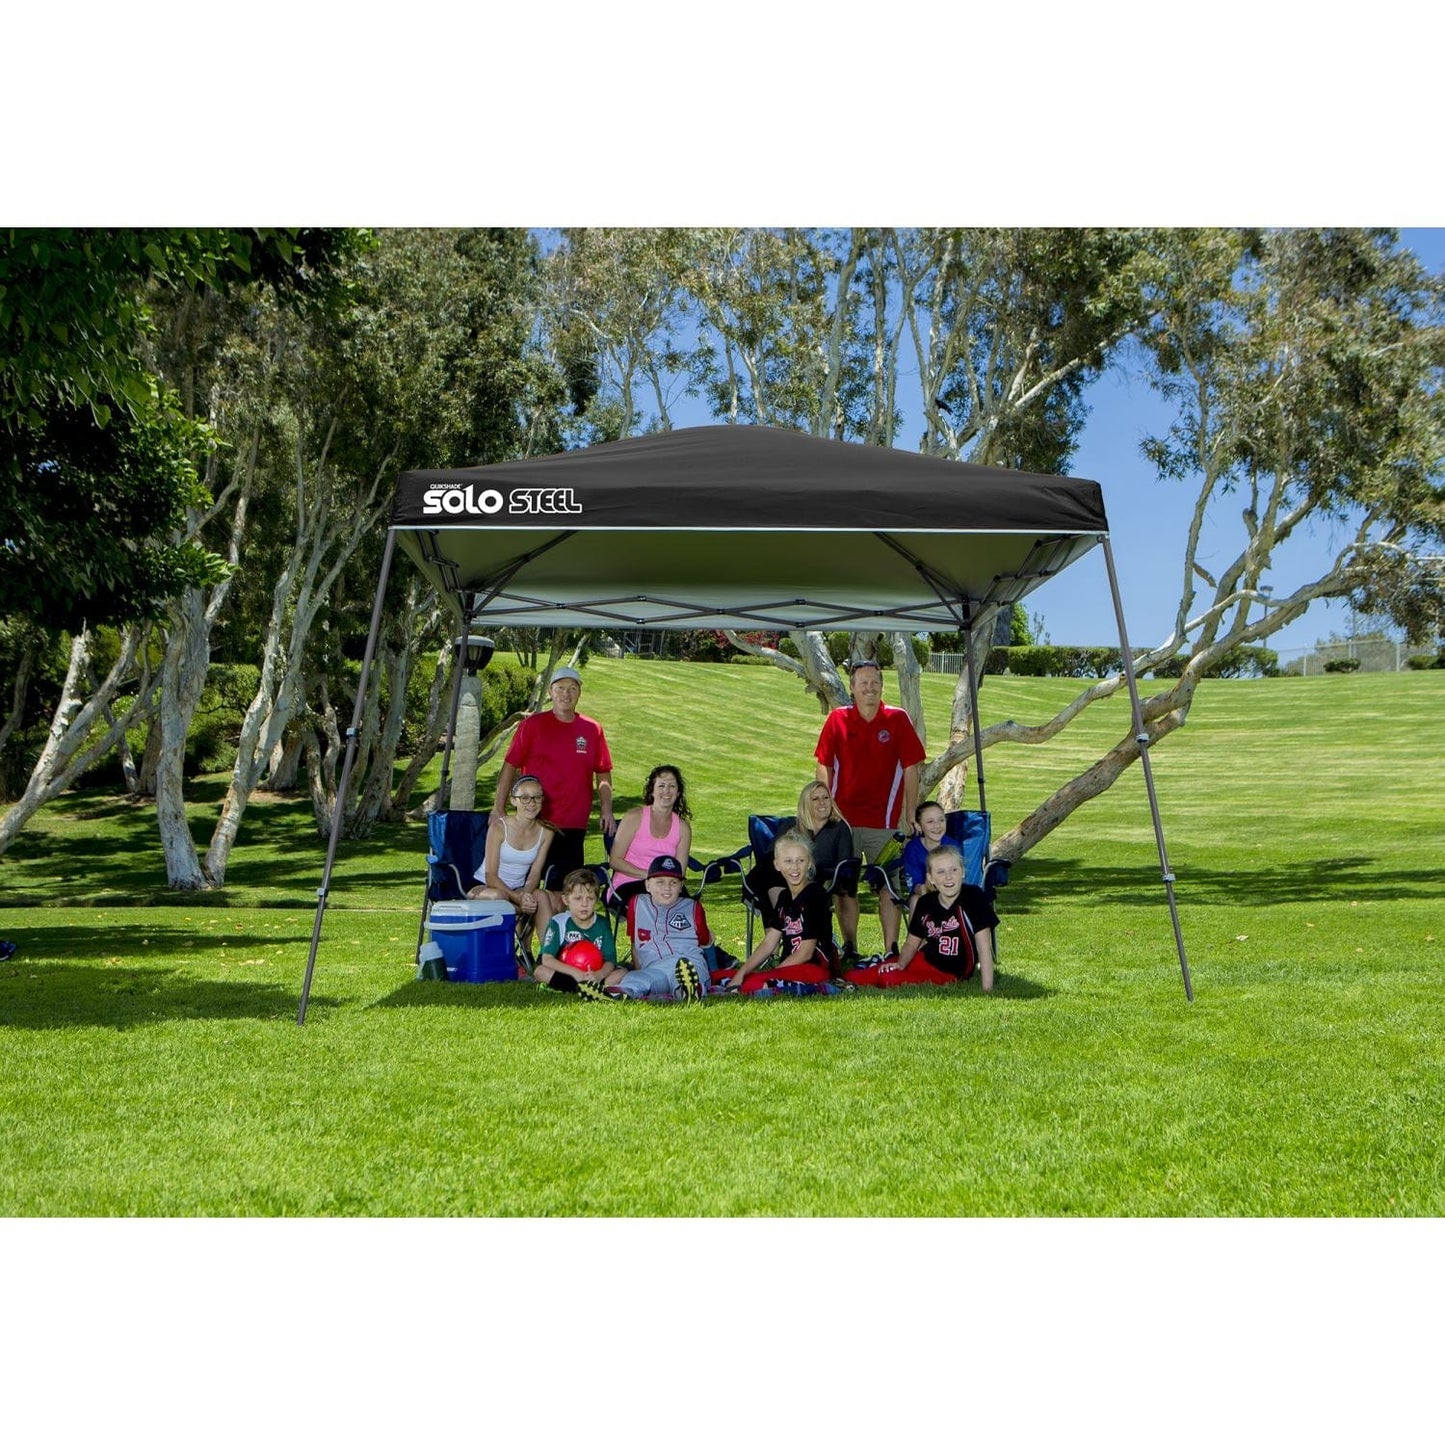 Quik Shade Pop Up Canopies Quik Shade | Solo Steel 90 11' x 11' Slant Leg Canopy - Black 167559DS